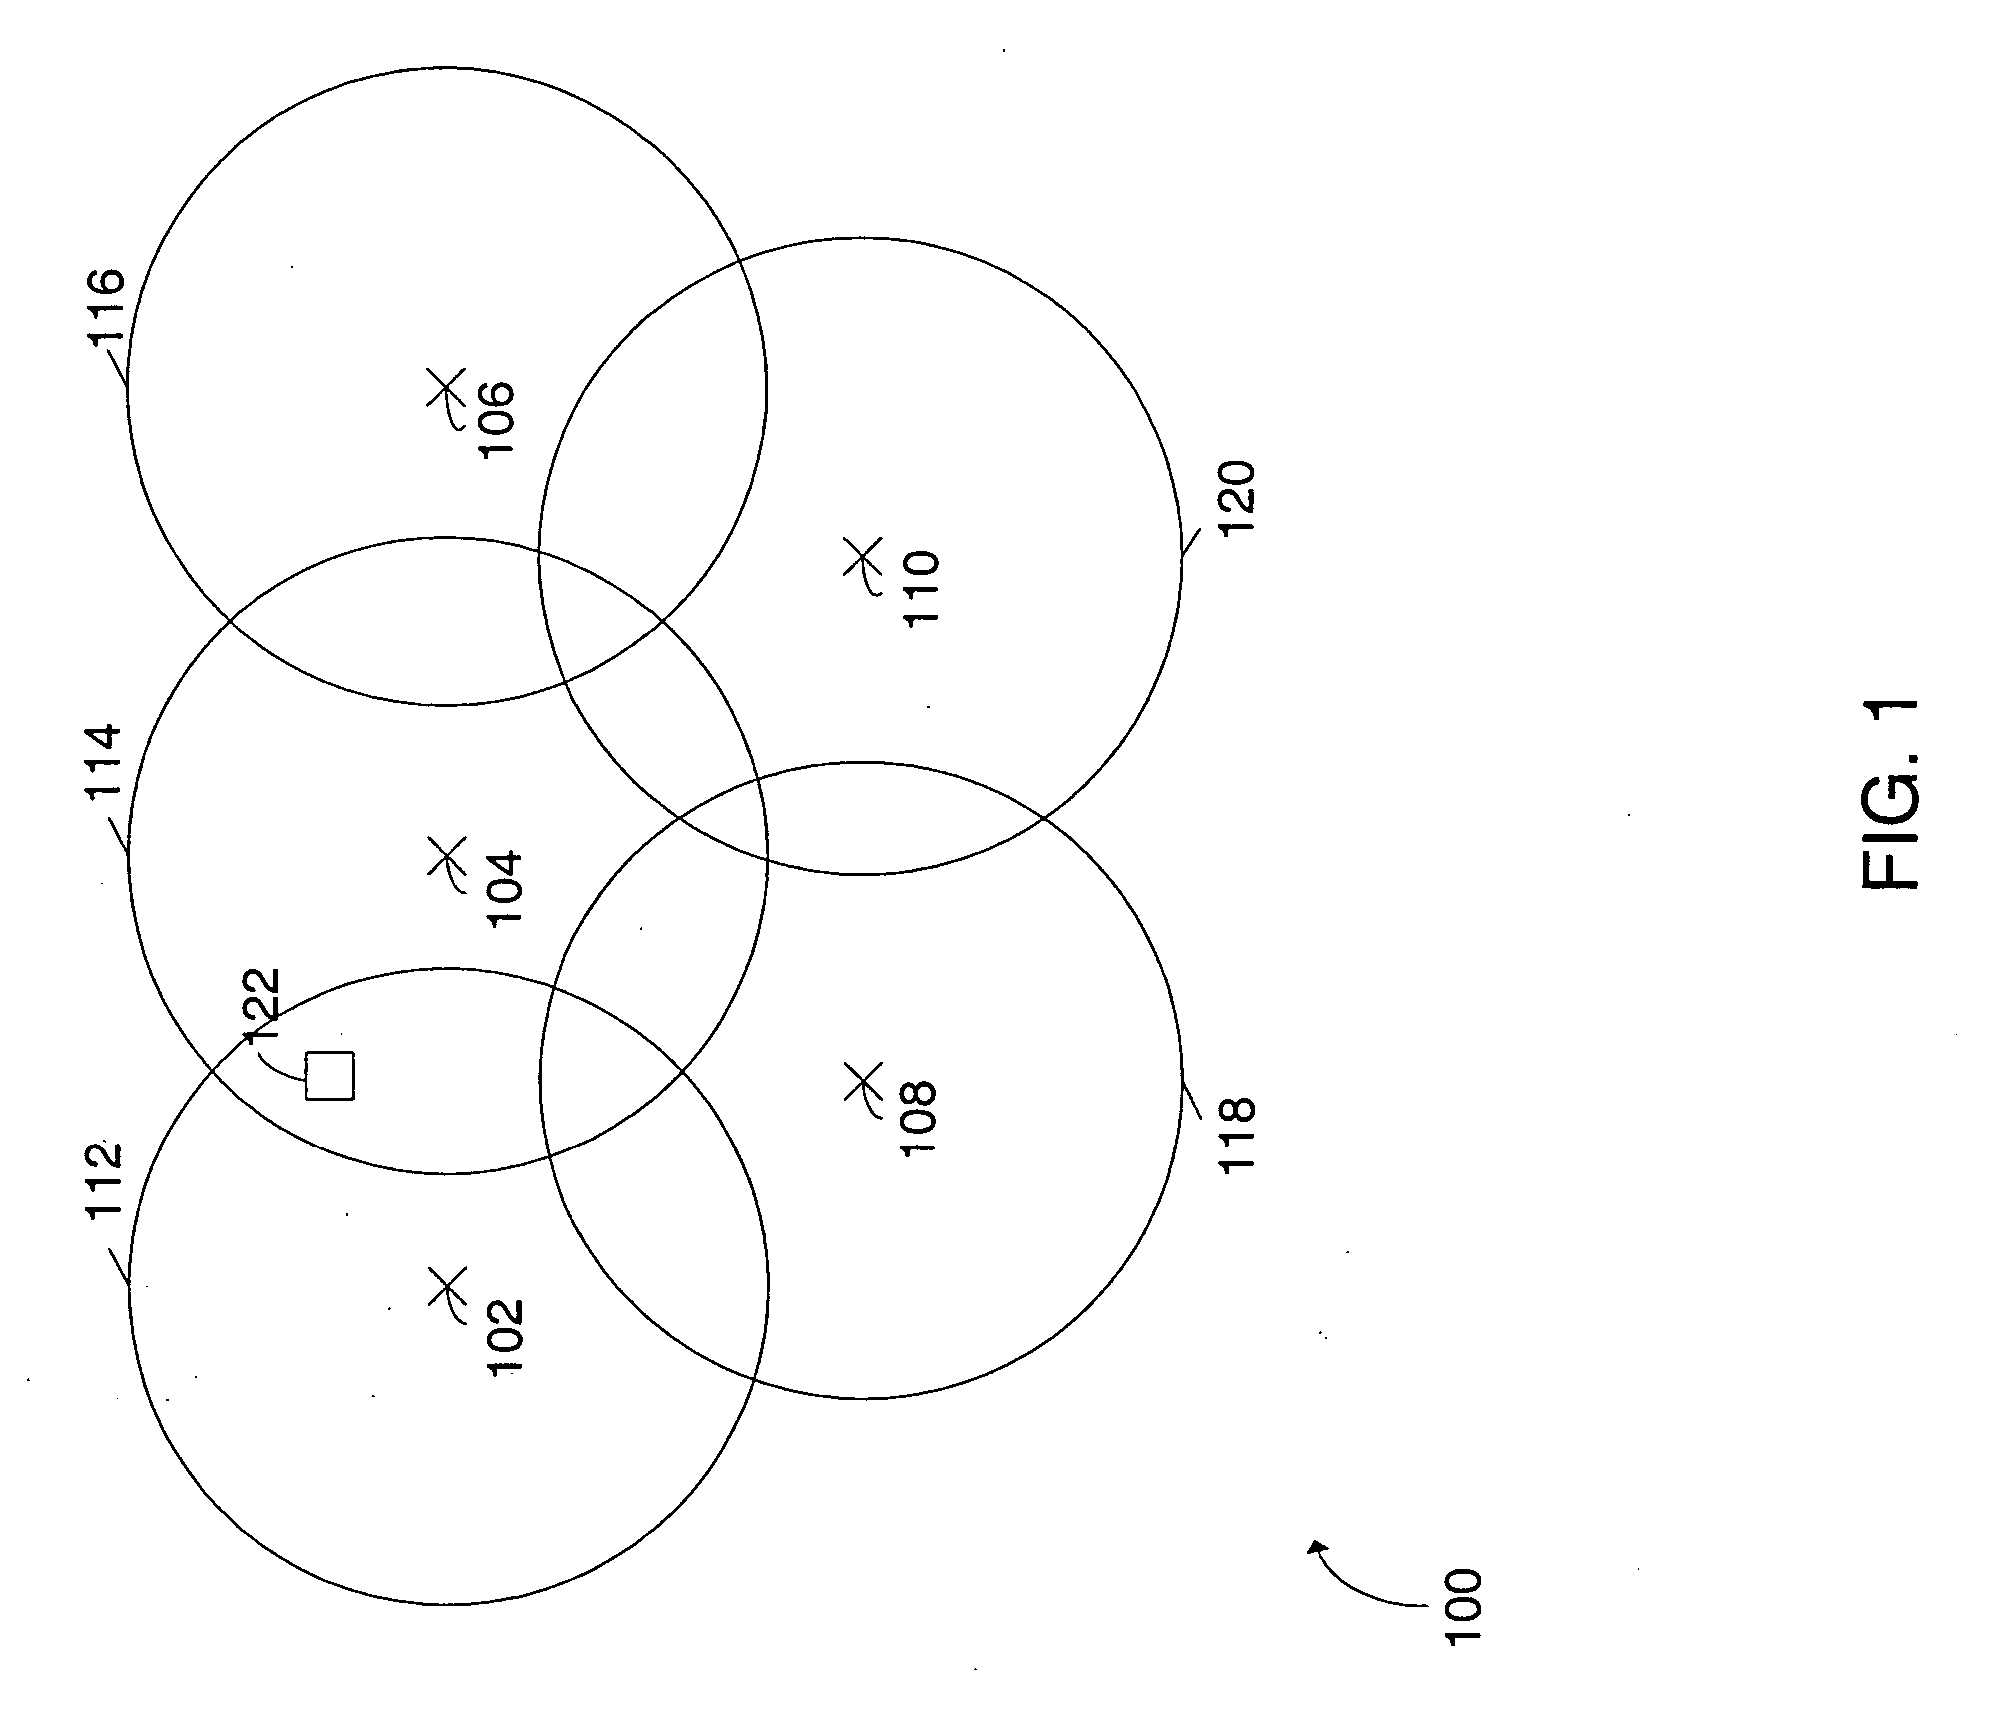 Method and apparatus for detecting excess delay in a communication signal